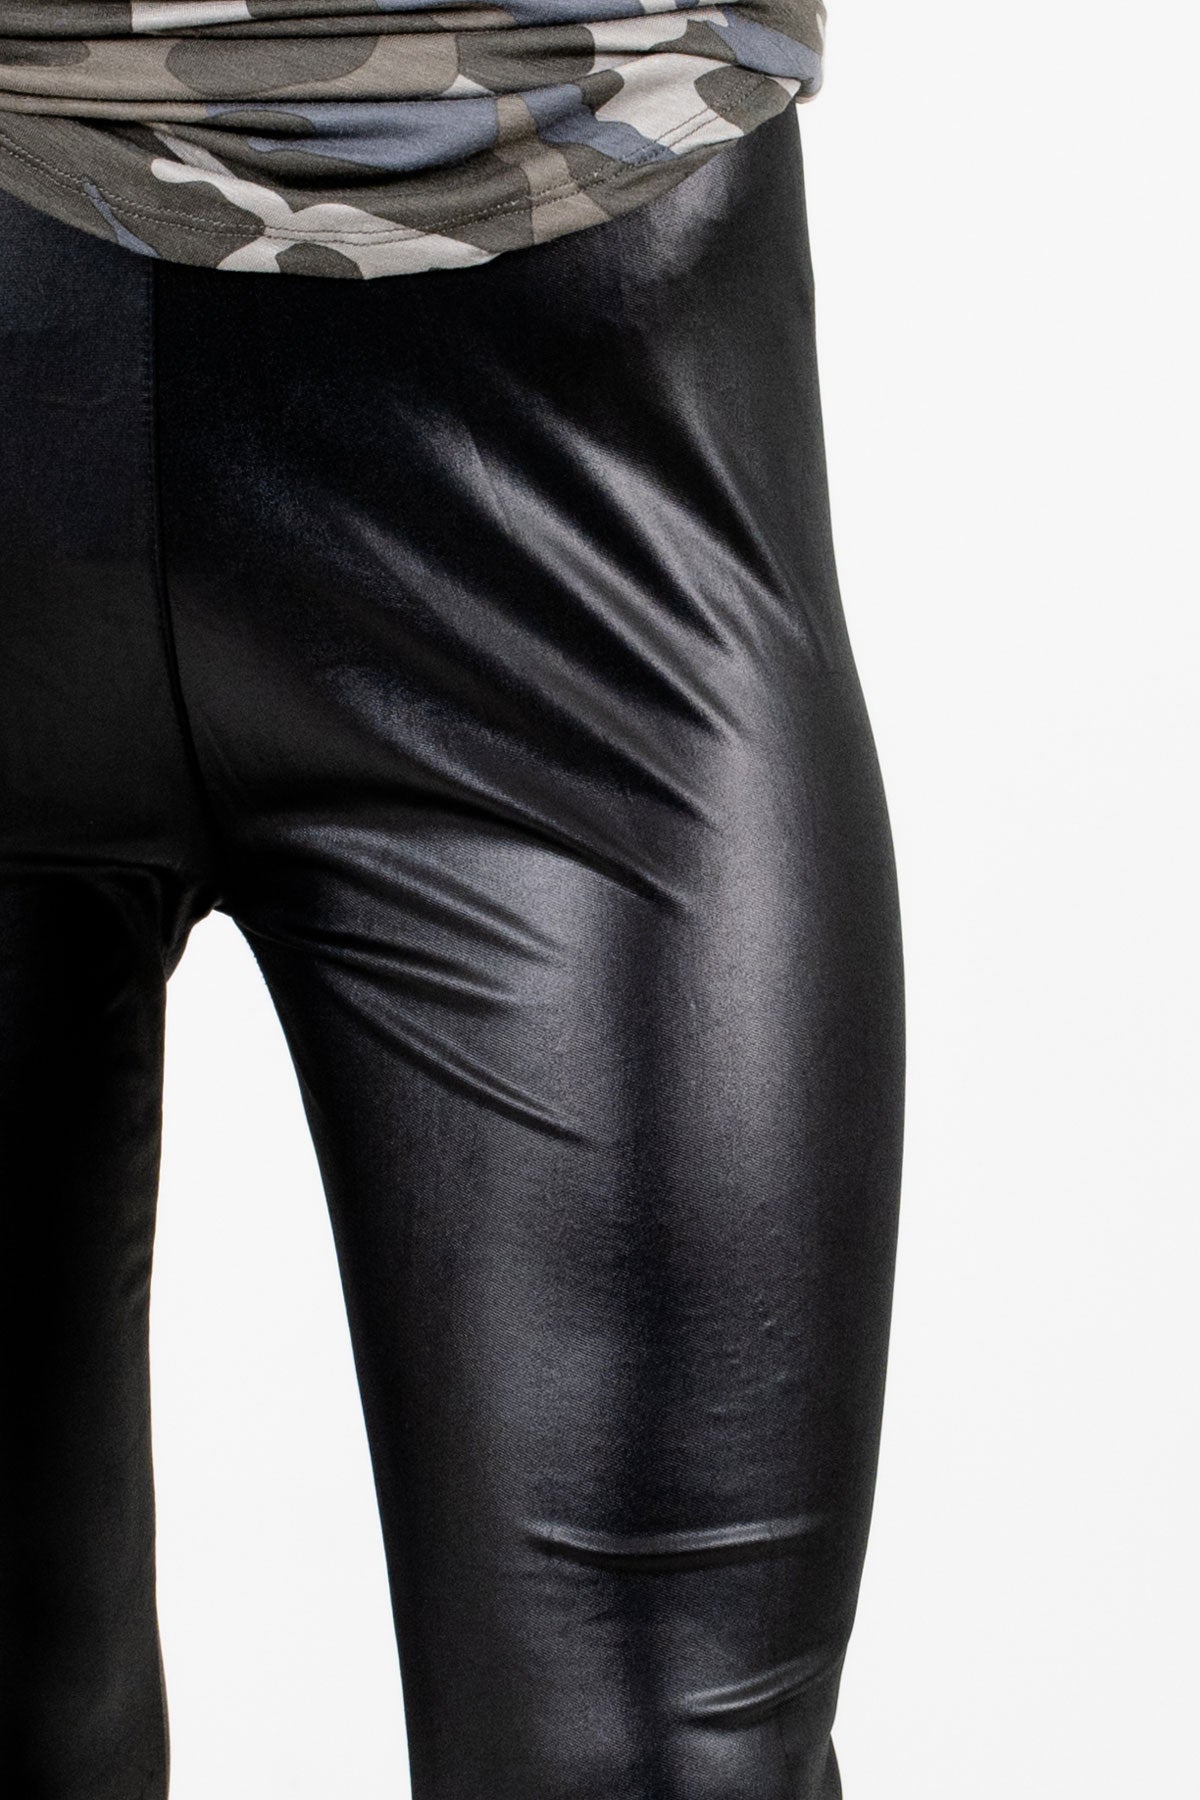 Sexy Shiny PU Leather Leggings Leather With Back Zipper Push Up Faux Pants  For Slim Fit In Black, Red, And Pink From Matthewaw, $49.15 | DHgate.Com